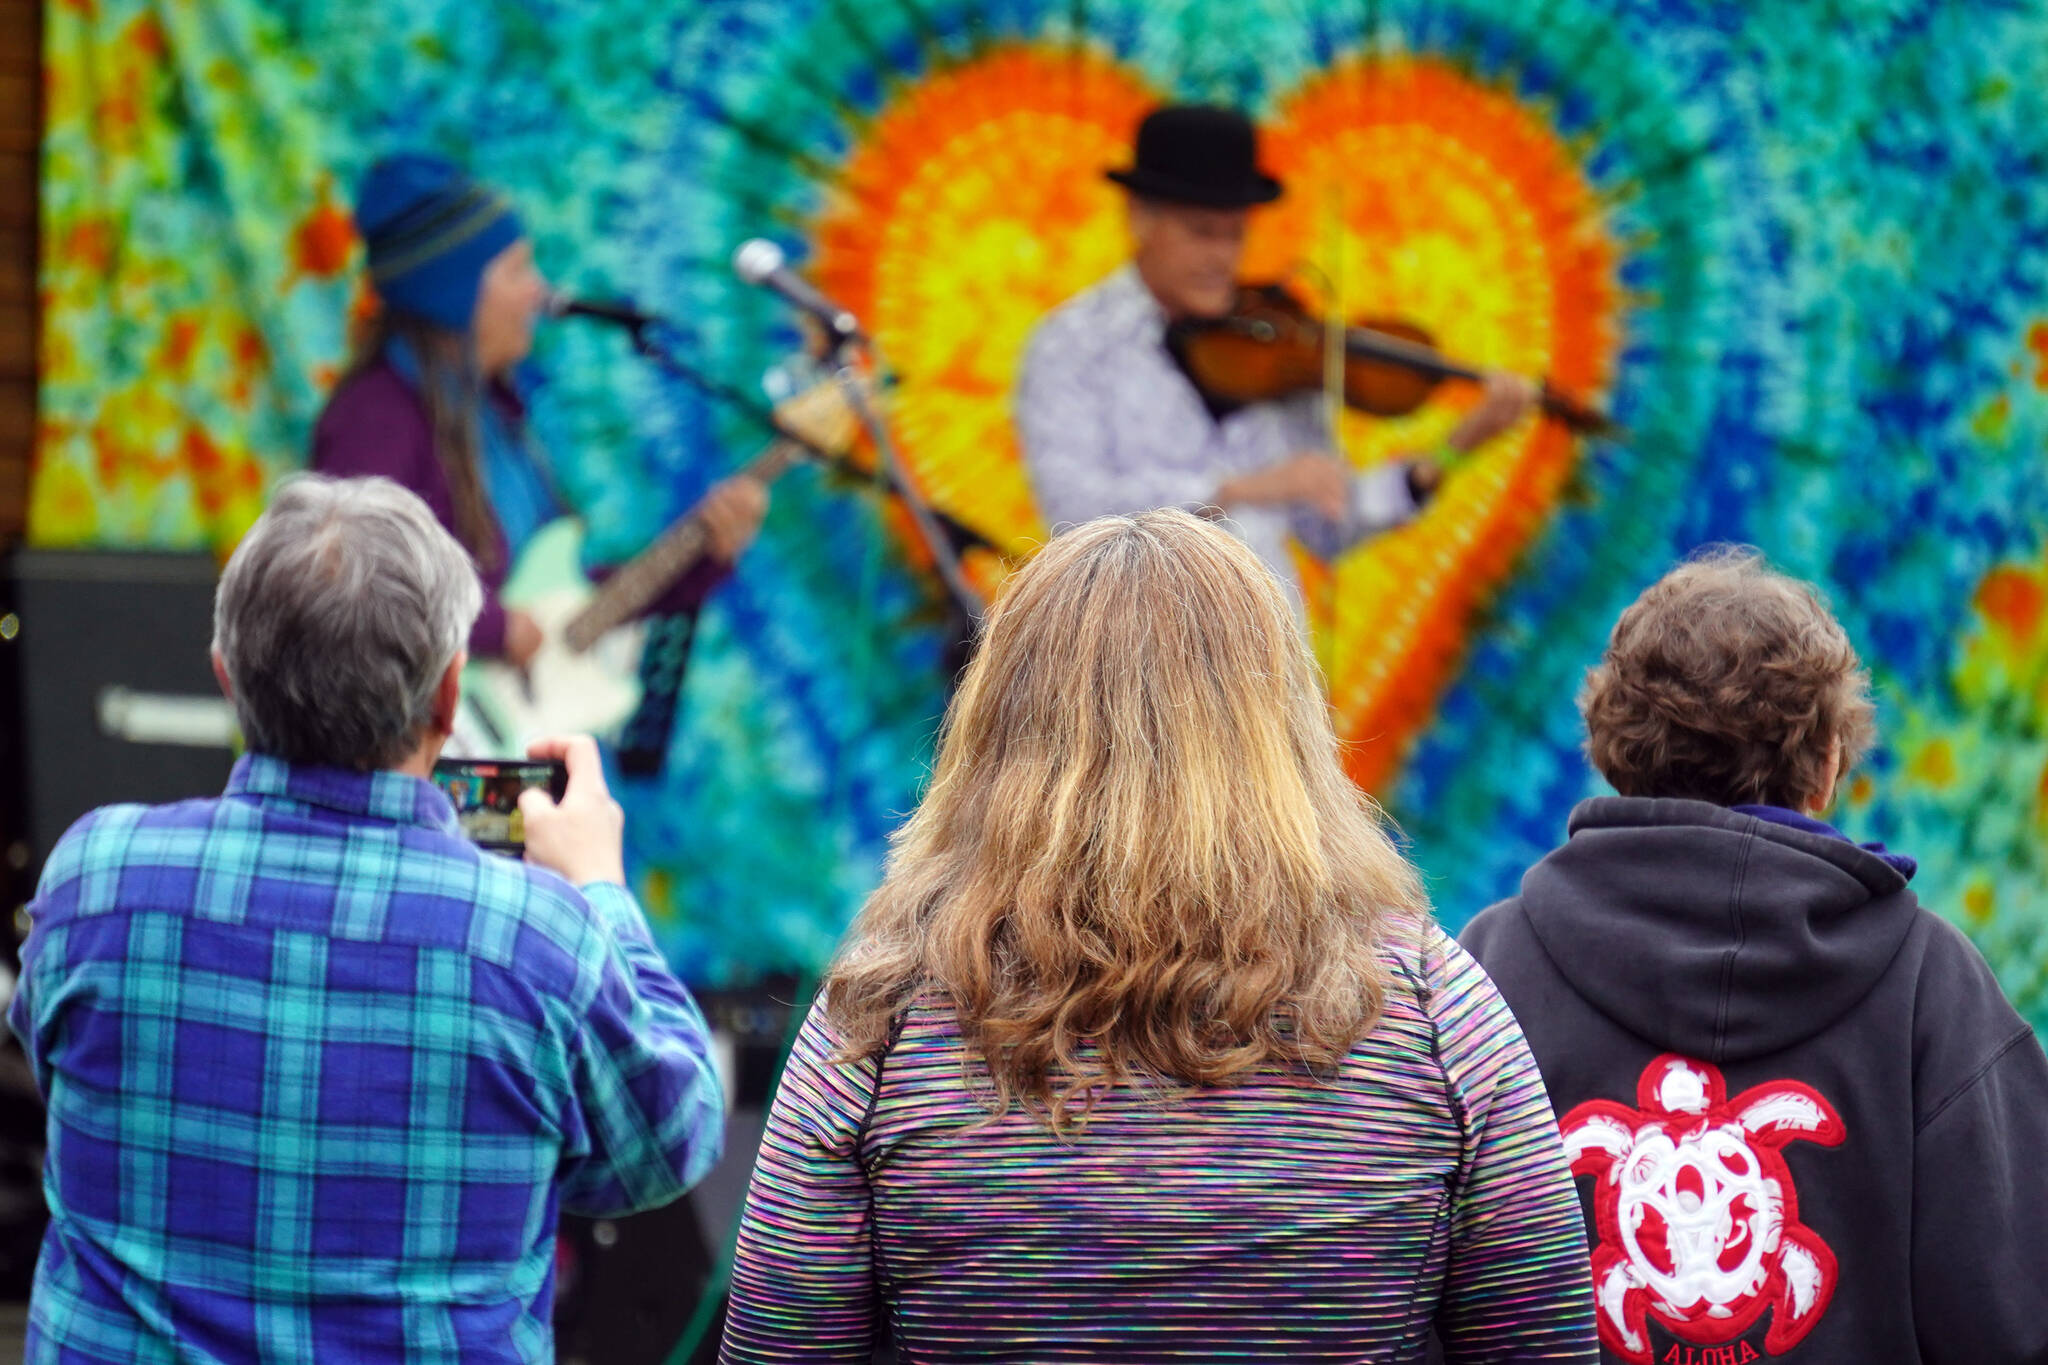 Attendees gather before the stage as Connie Brannock’s Tiny House of Funk performs during the Soldotna Music Series at Soldotna Creek Park in Soldotna, Alaska, on Wednesday, June 21, 2023. (Jake Dye/Peninsula Clarion)